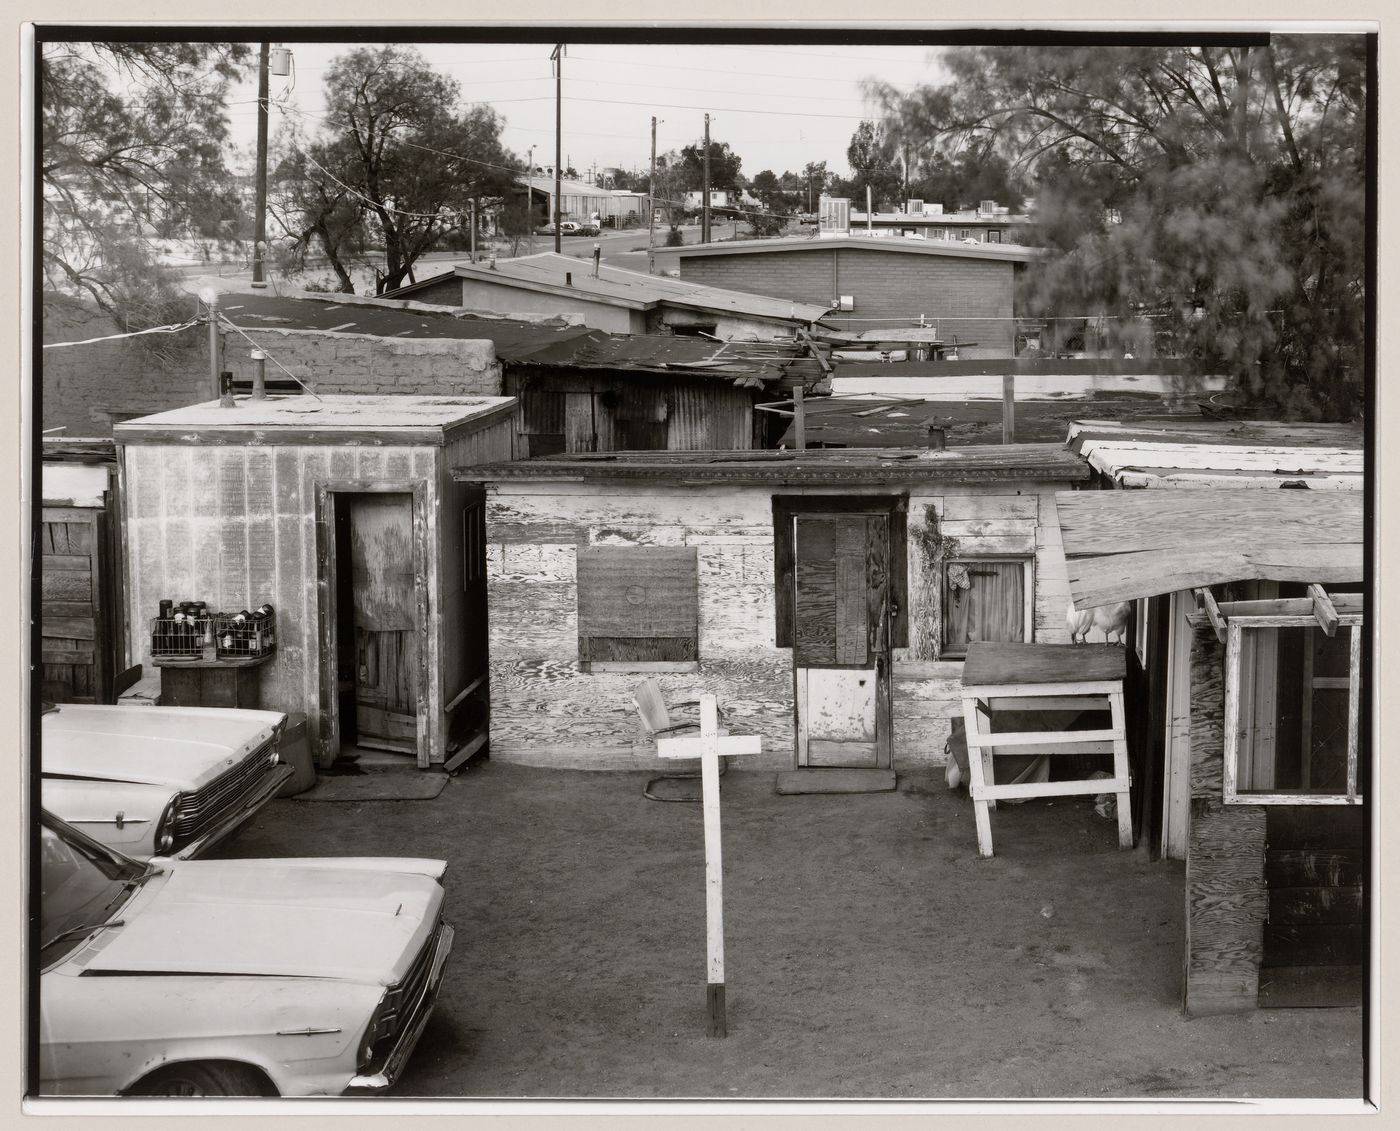 View of cross in yard seen from roof, Old Pascua, Tucson, Arizona, United States (from a series documenting the Yaqui community of Old Pascua)